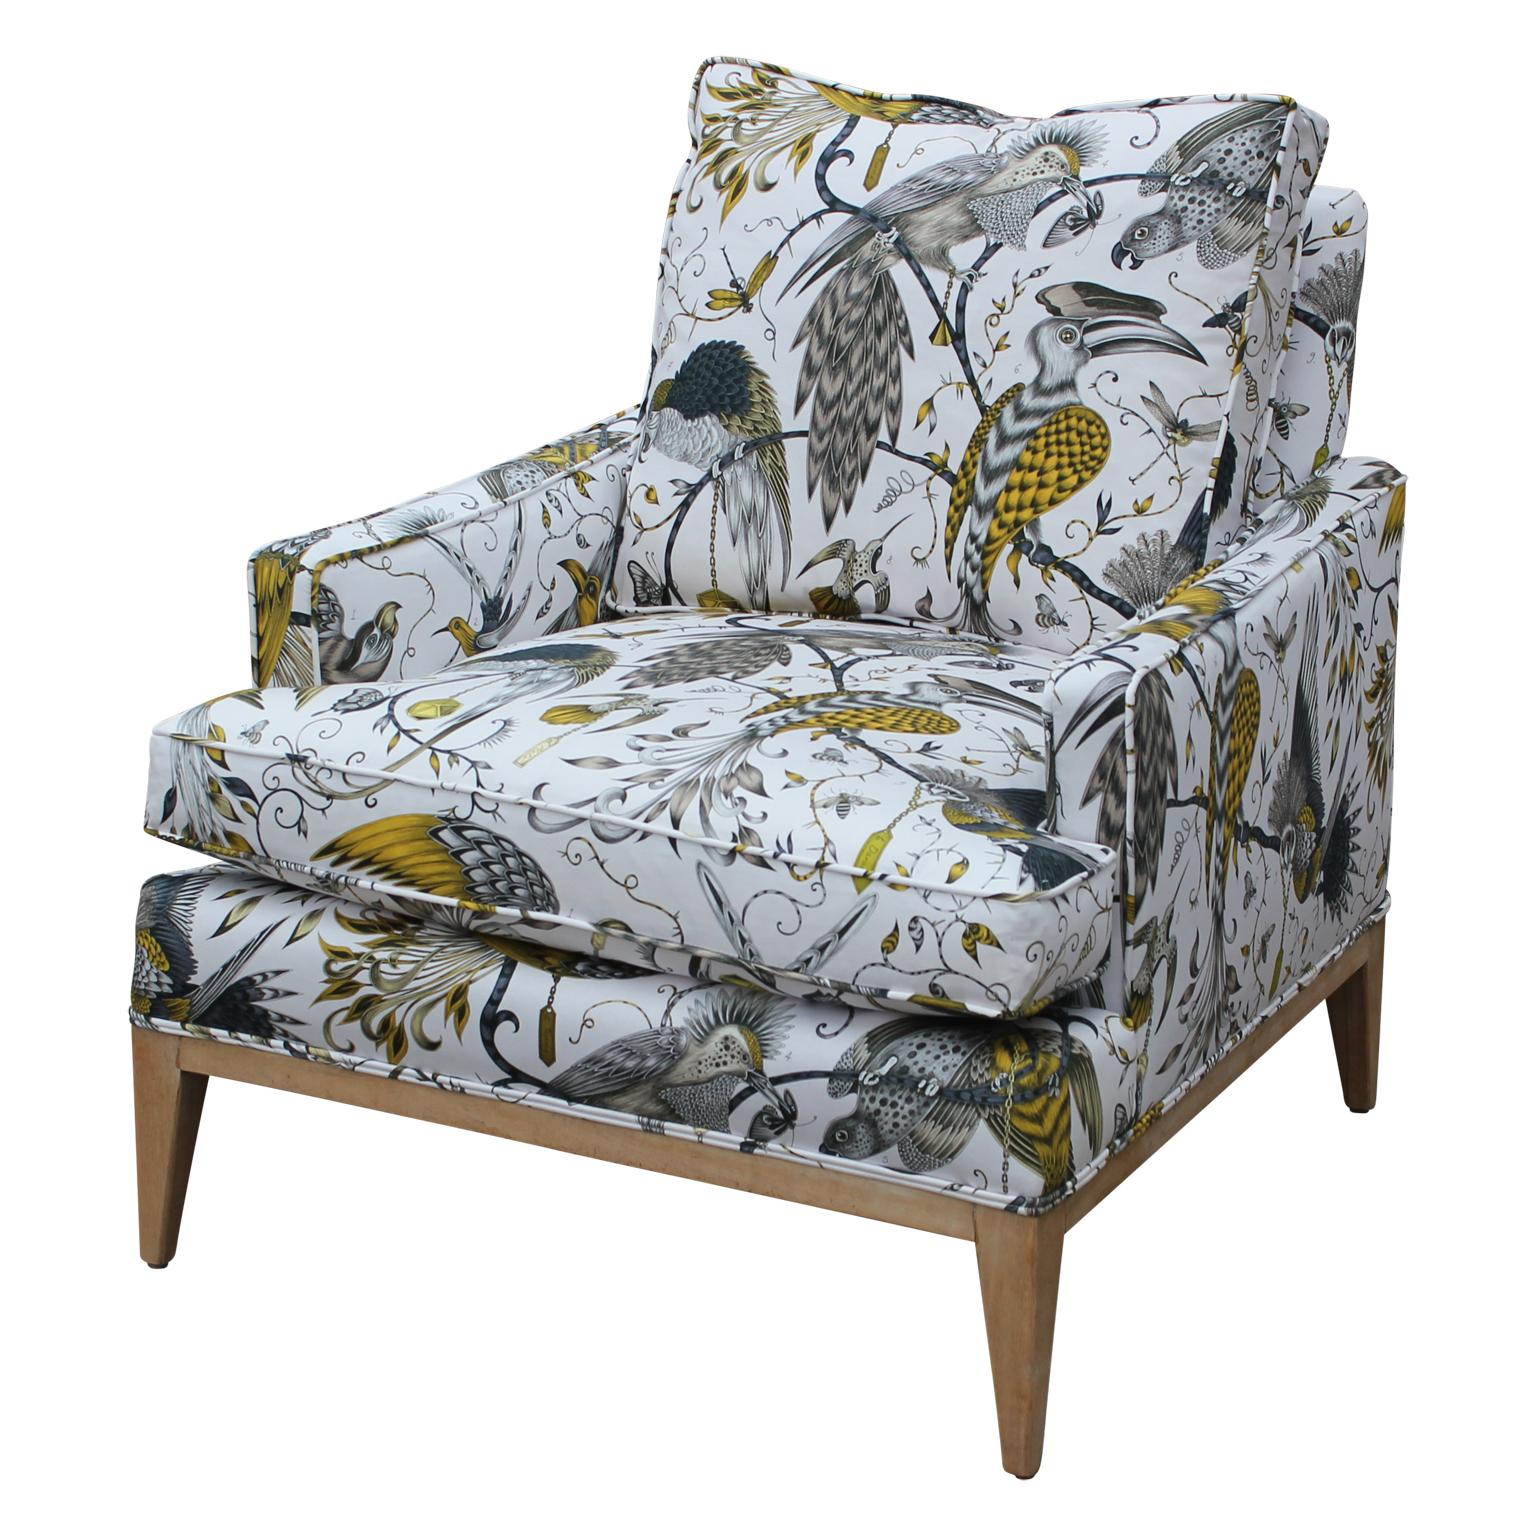 Beautiful pair of Edward Wormley for Drexel custom animalia bird print lounge chairs. Bleached mahogany legs and base and comfortable goose-down blend cushions.